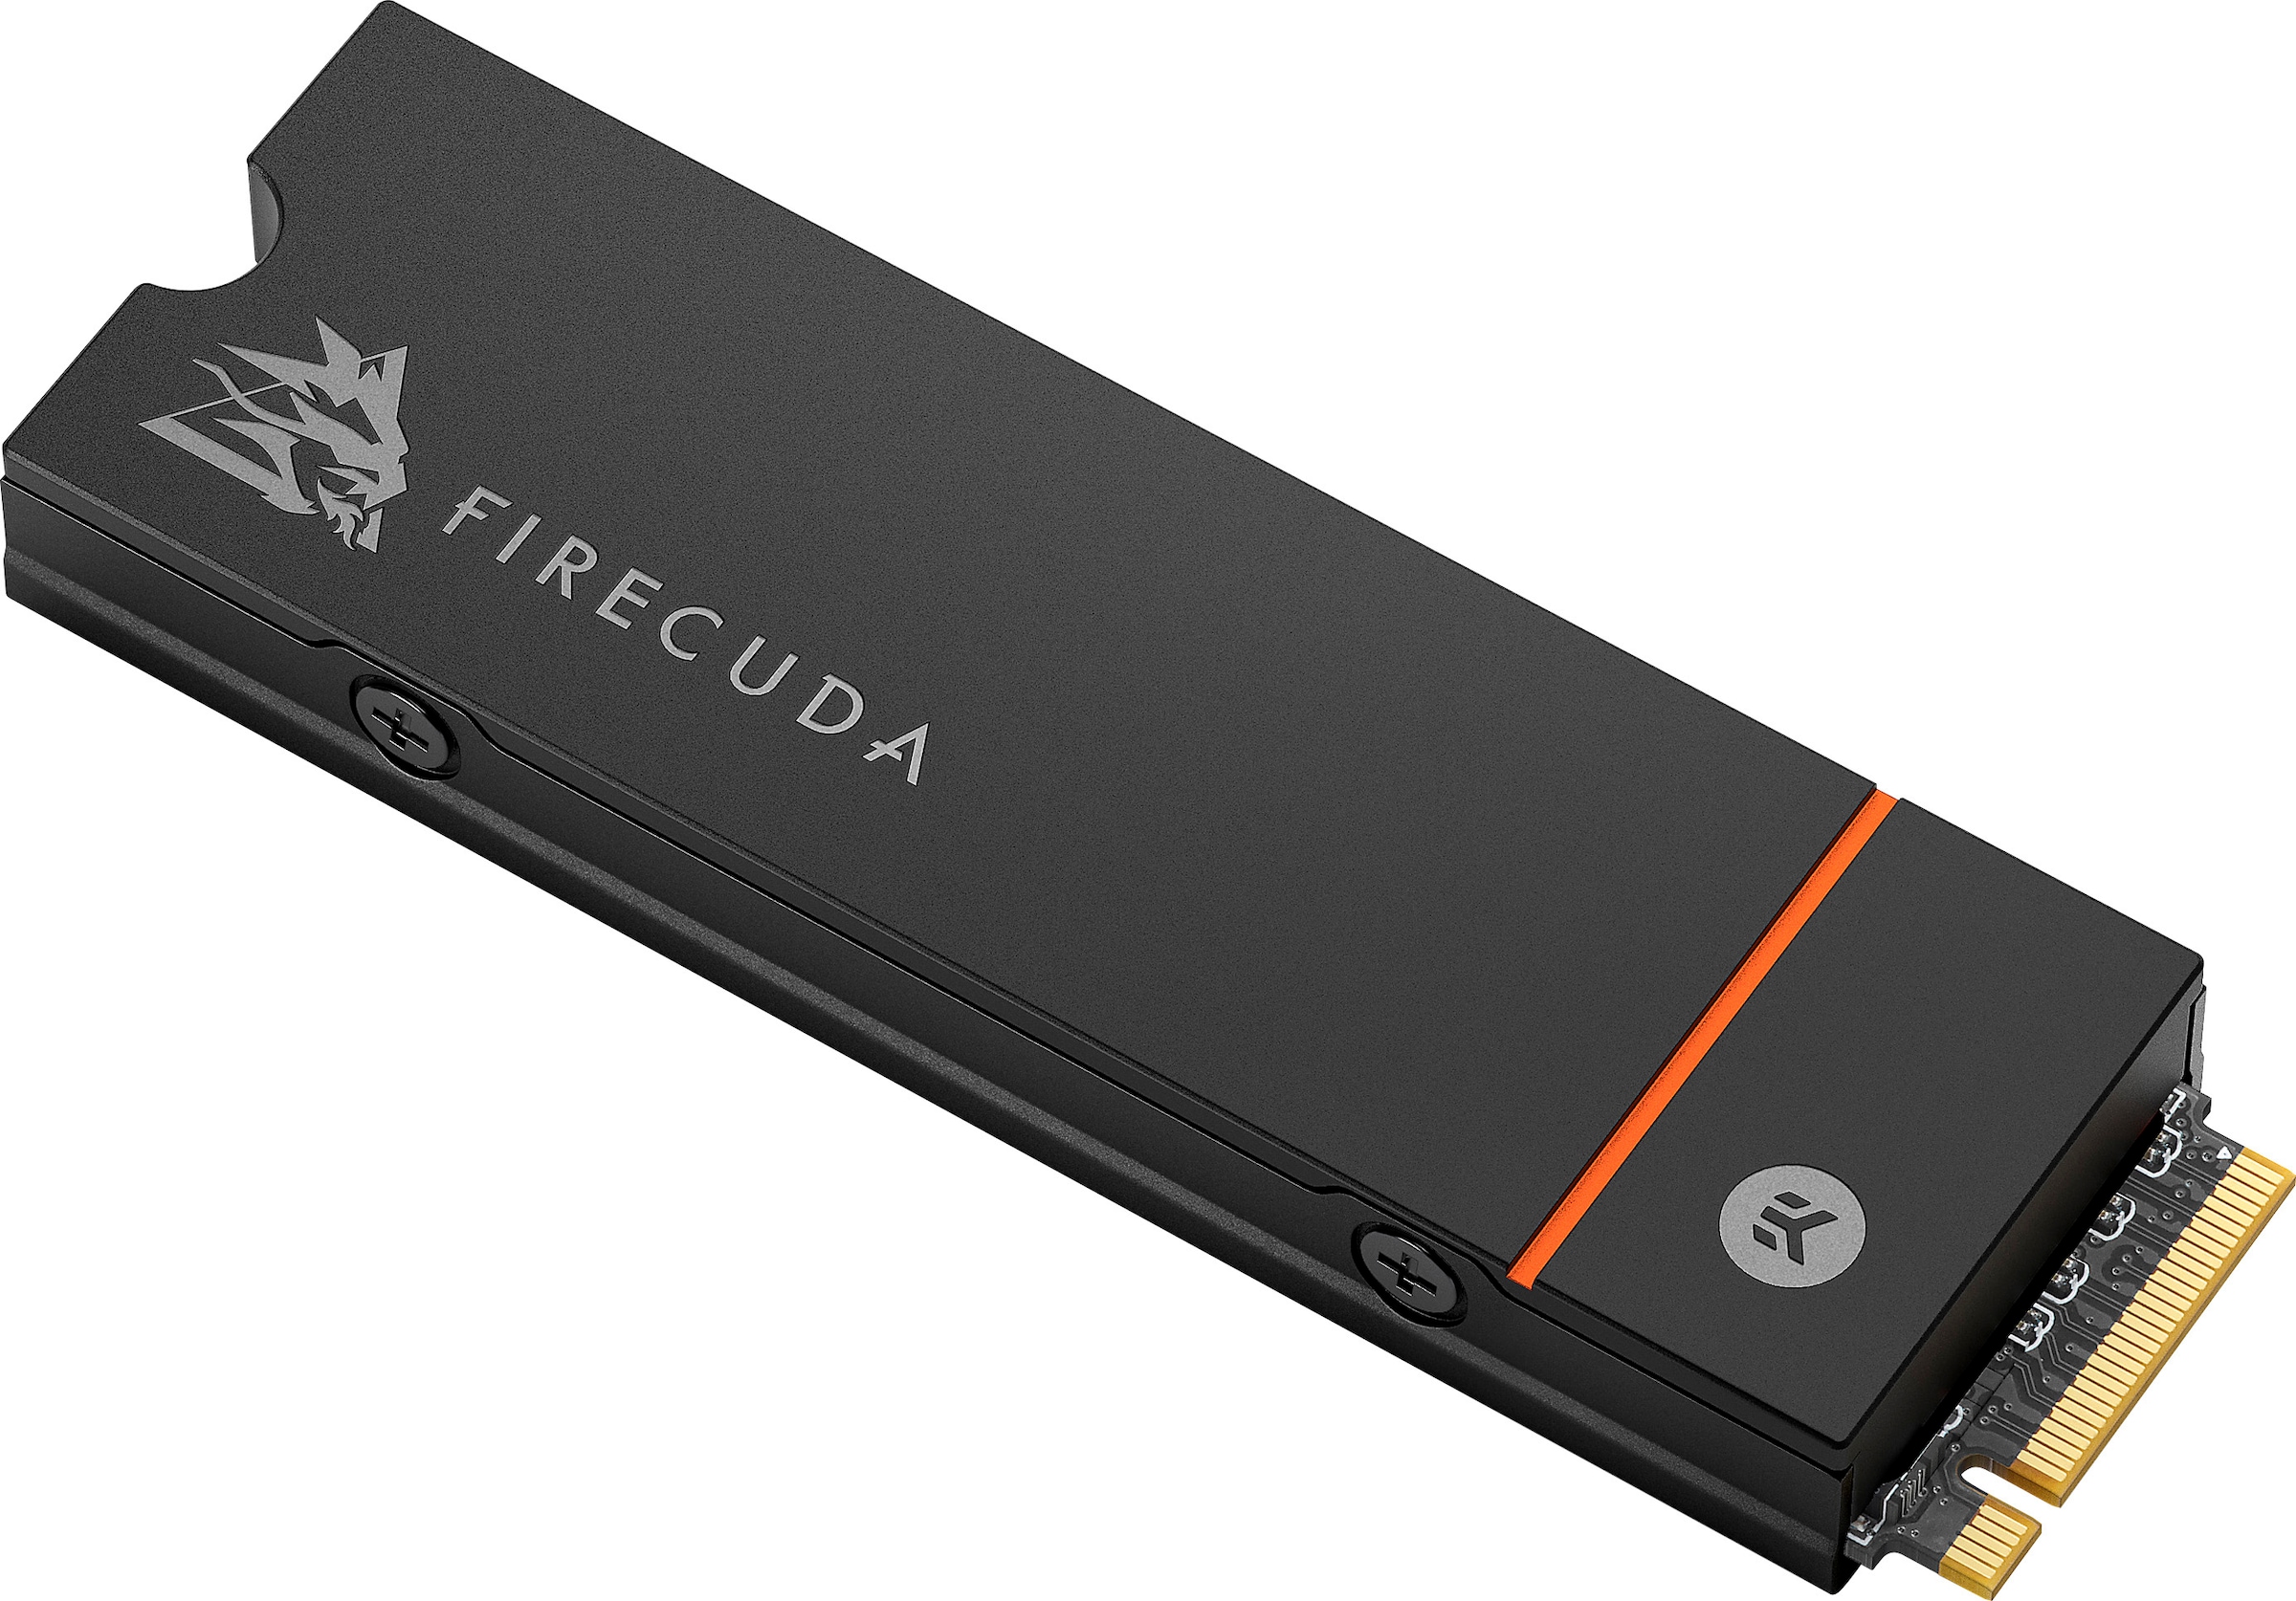 Seagate Gaming-SSD »FireCuda 530 mit Kühlkörper«, Anschluss M.2 PCIe 4.0, Playstation 5 kompatibel, inkl. 3 Jahre Rescue Data Recovery Services